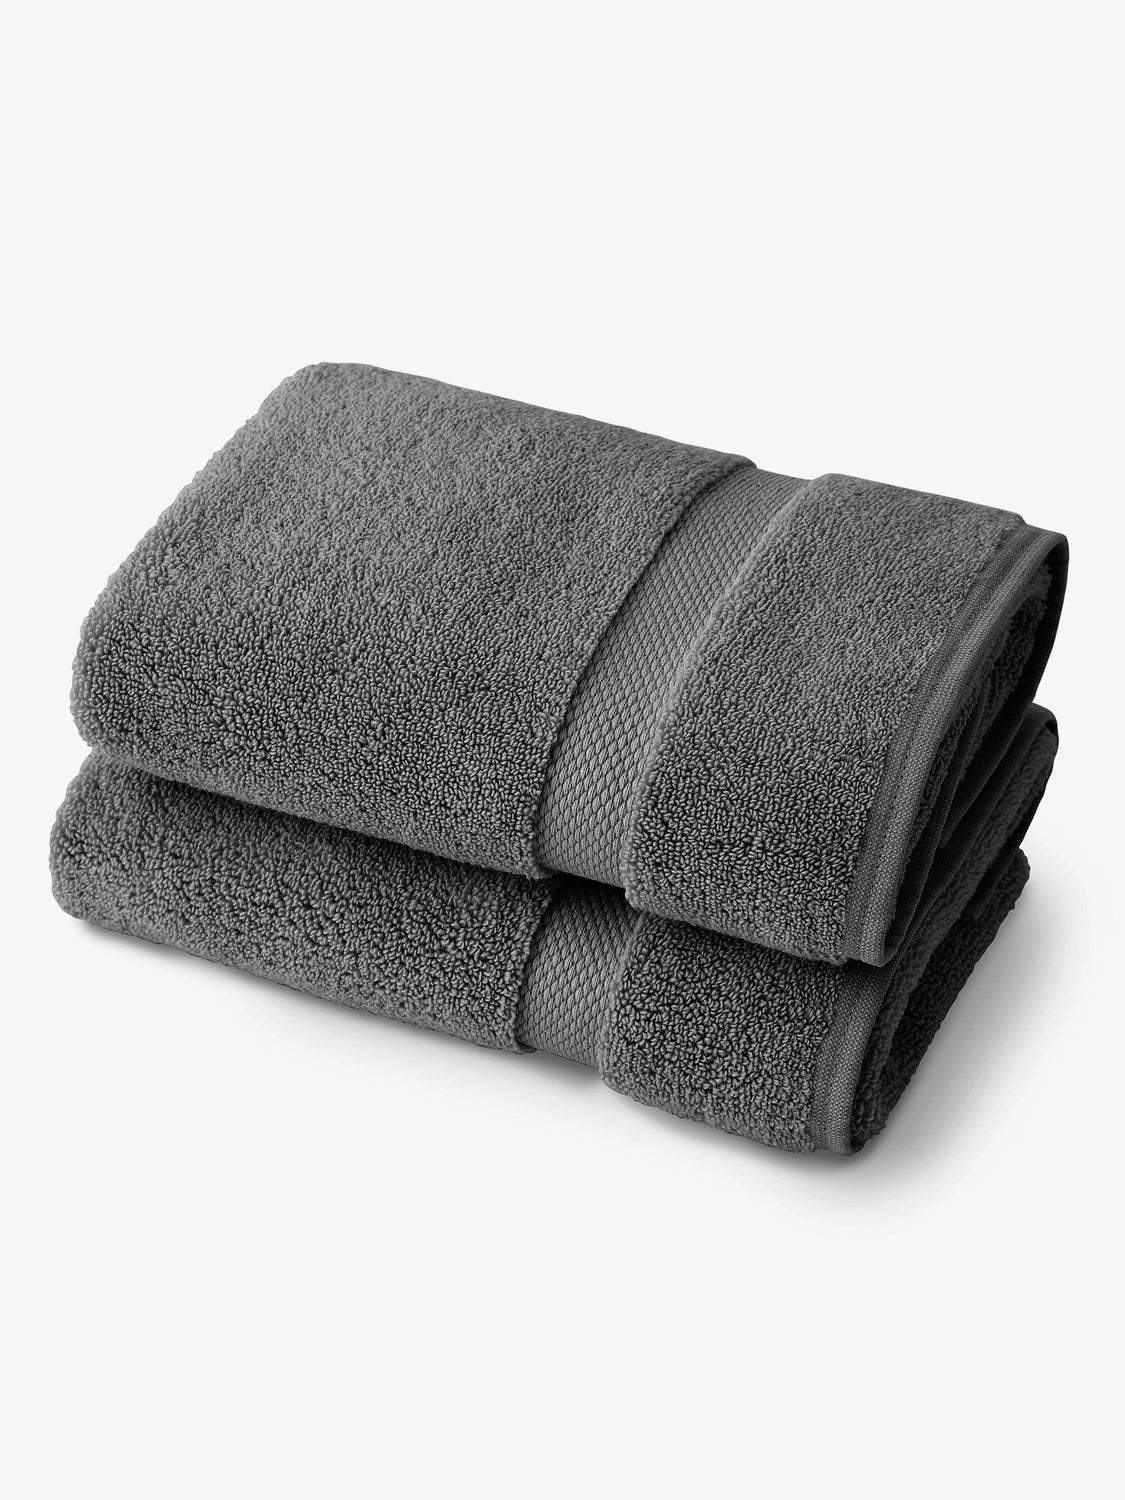 A pair of dark gray cotton bath towels folded on top of one another.